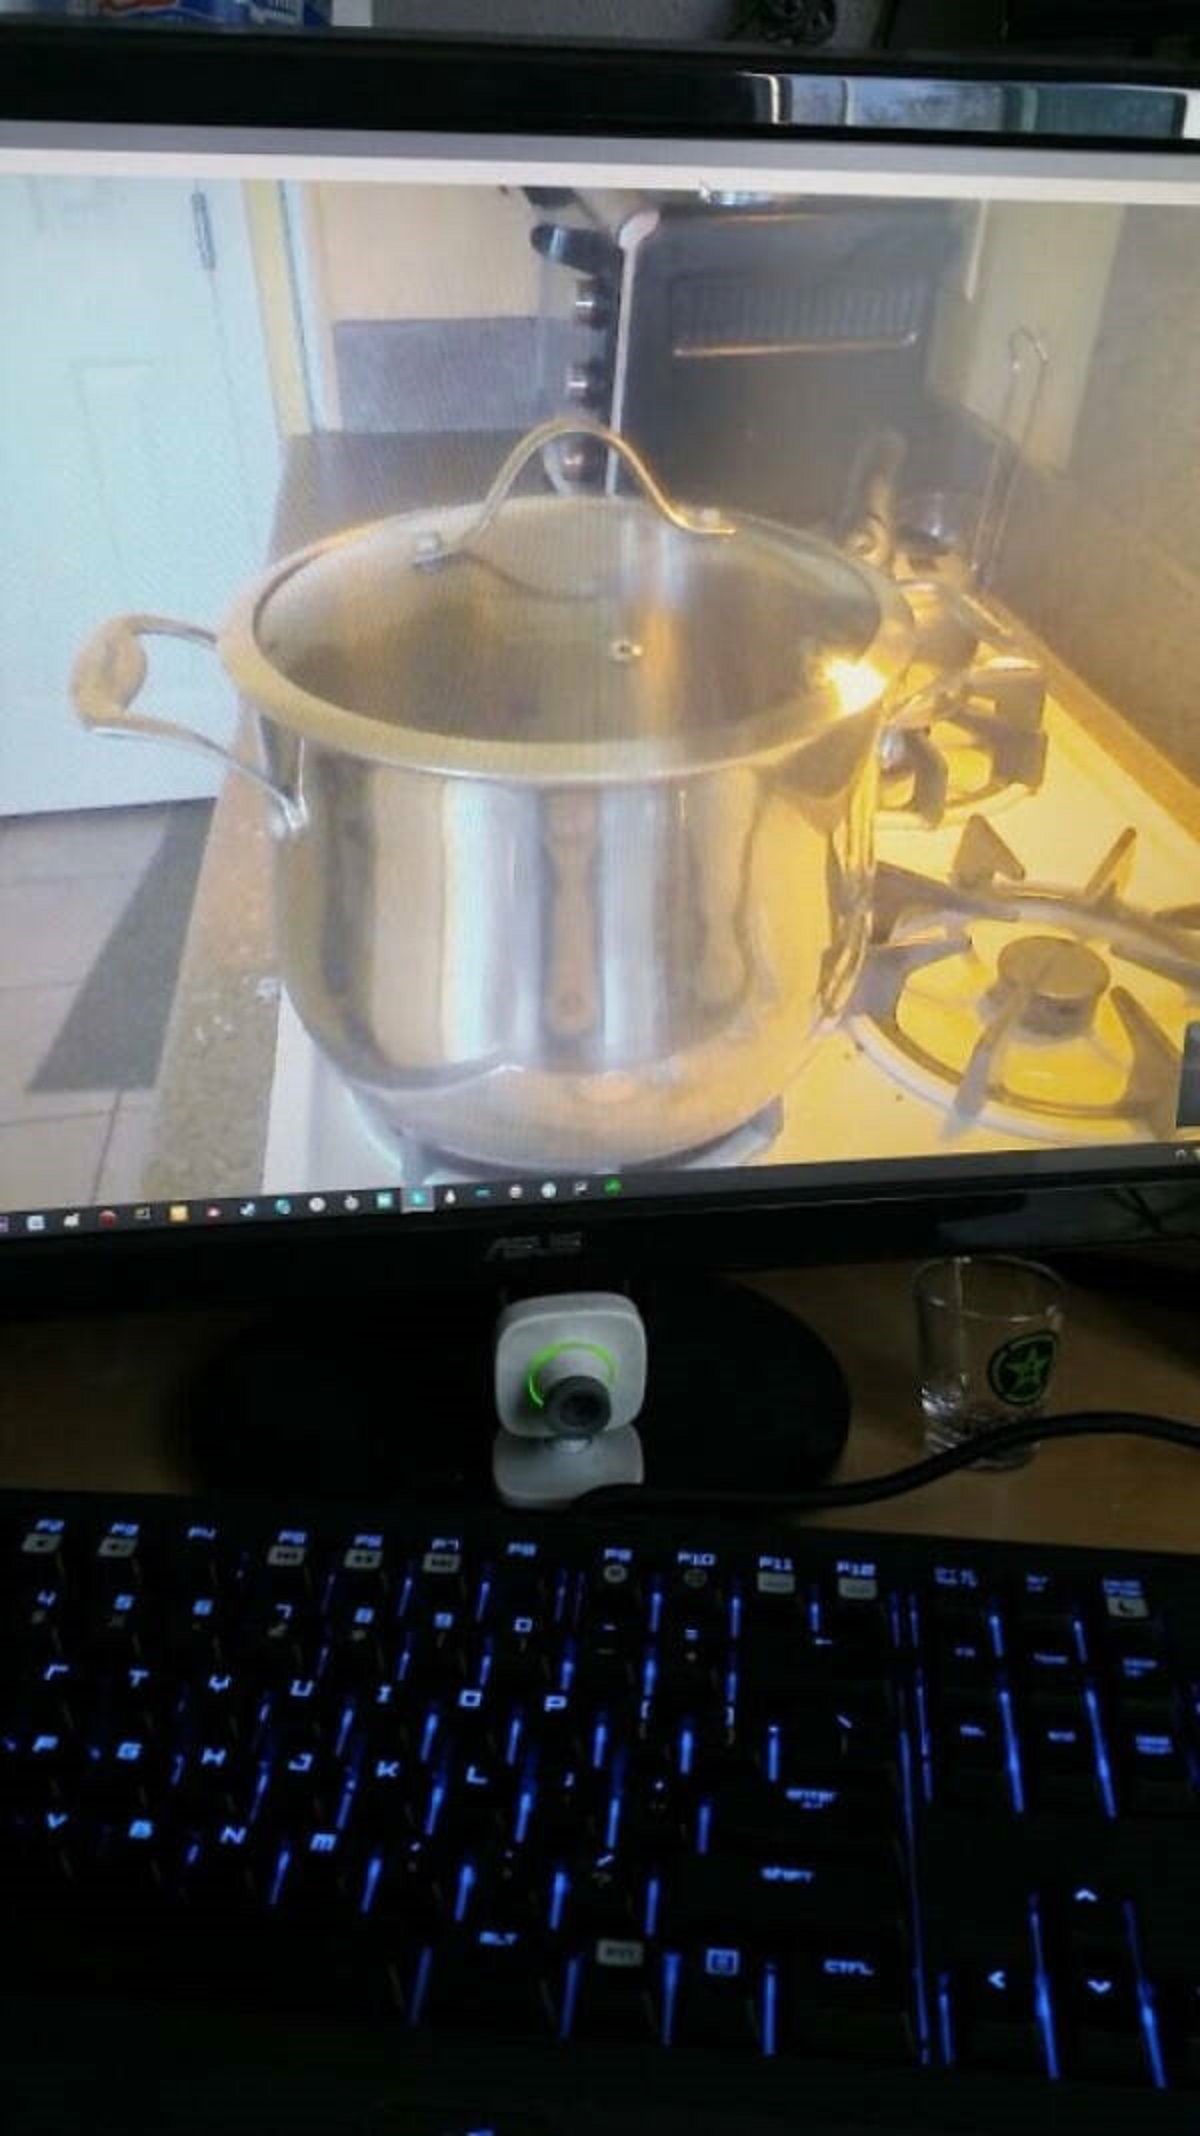 “I was too lazy to keep getting up and check my pot if it was boiling, so I just skyped it”